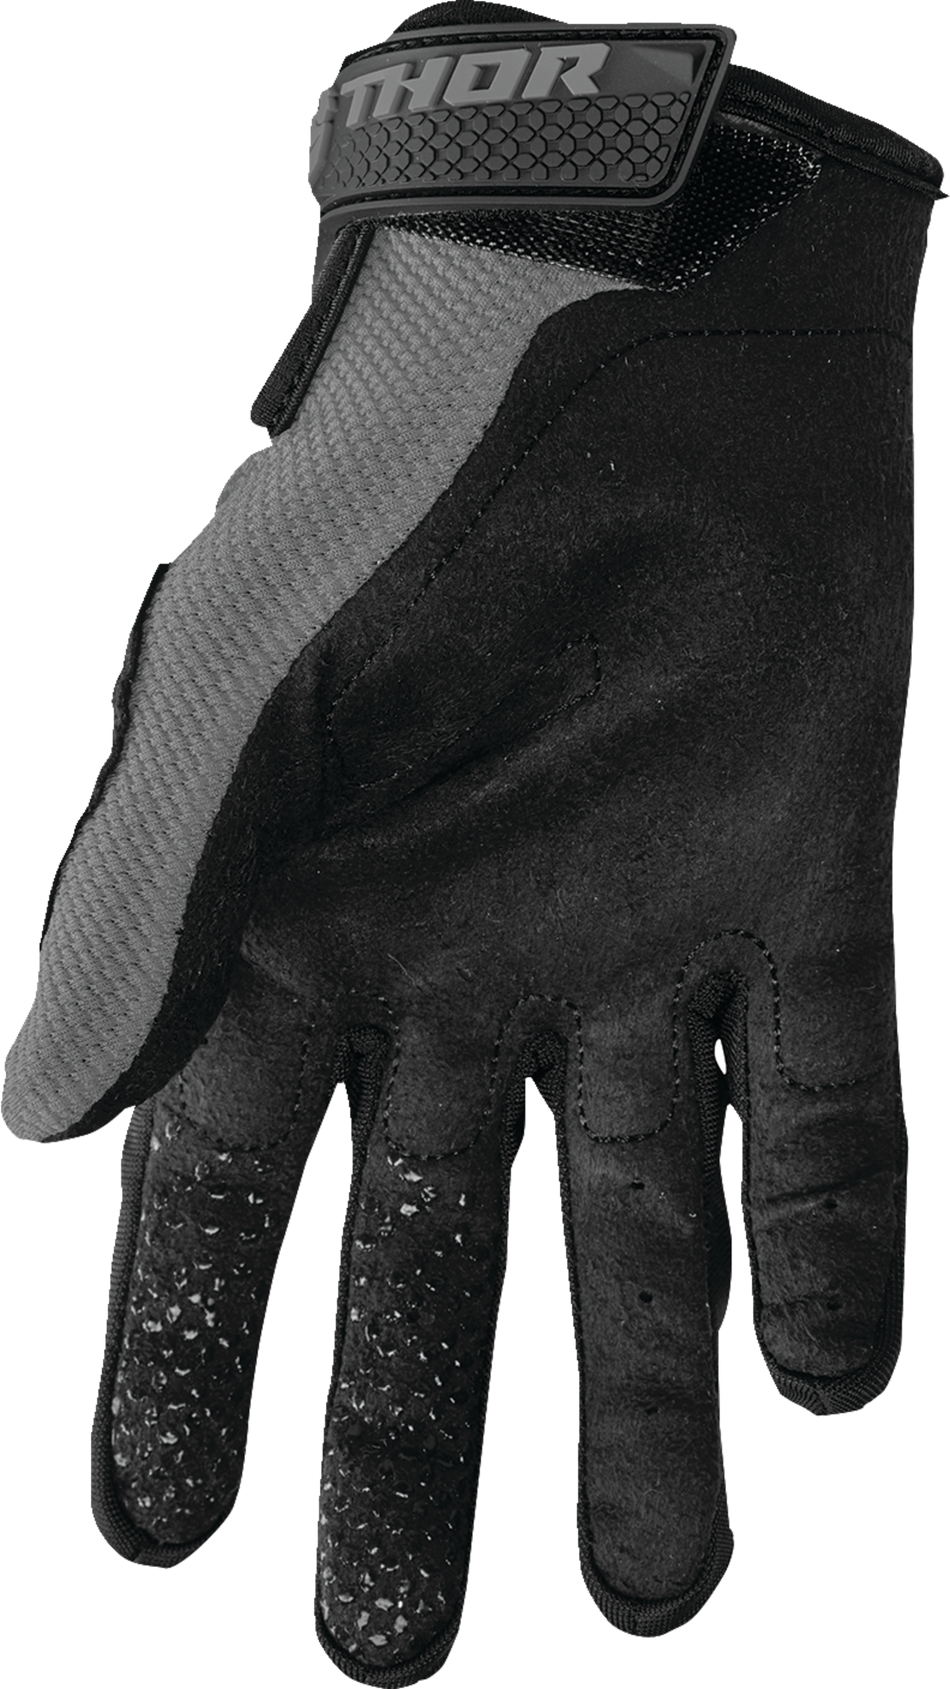 THOR Sector Gloves - Gray/White - XL 3330-7277